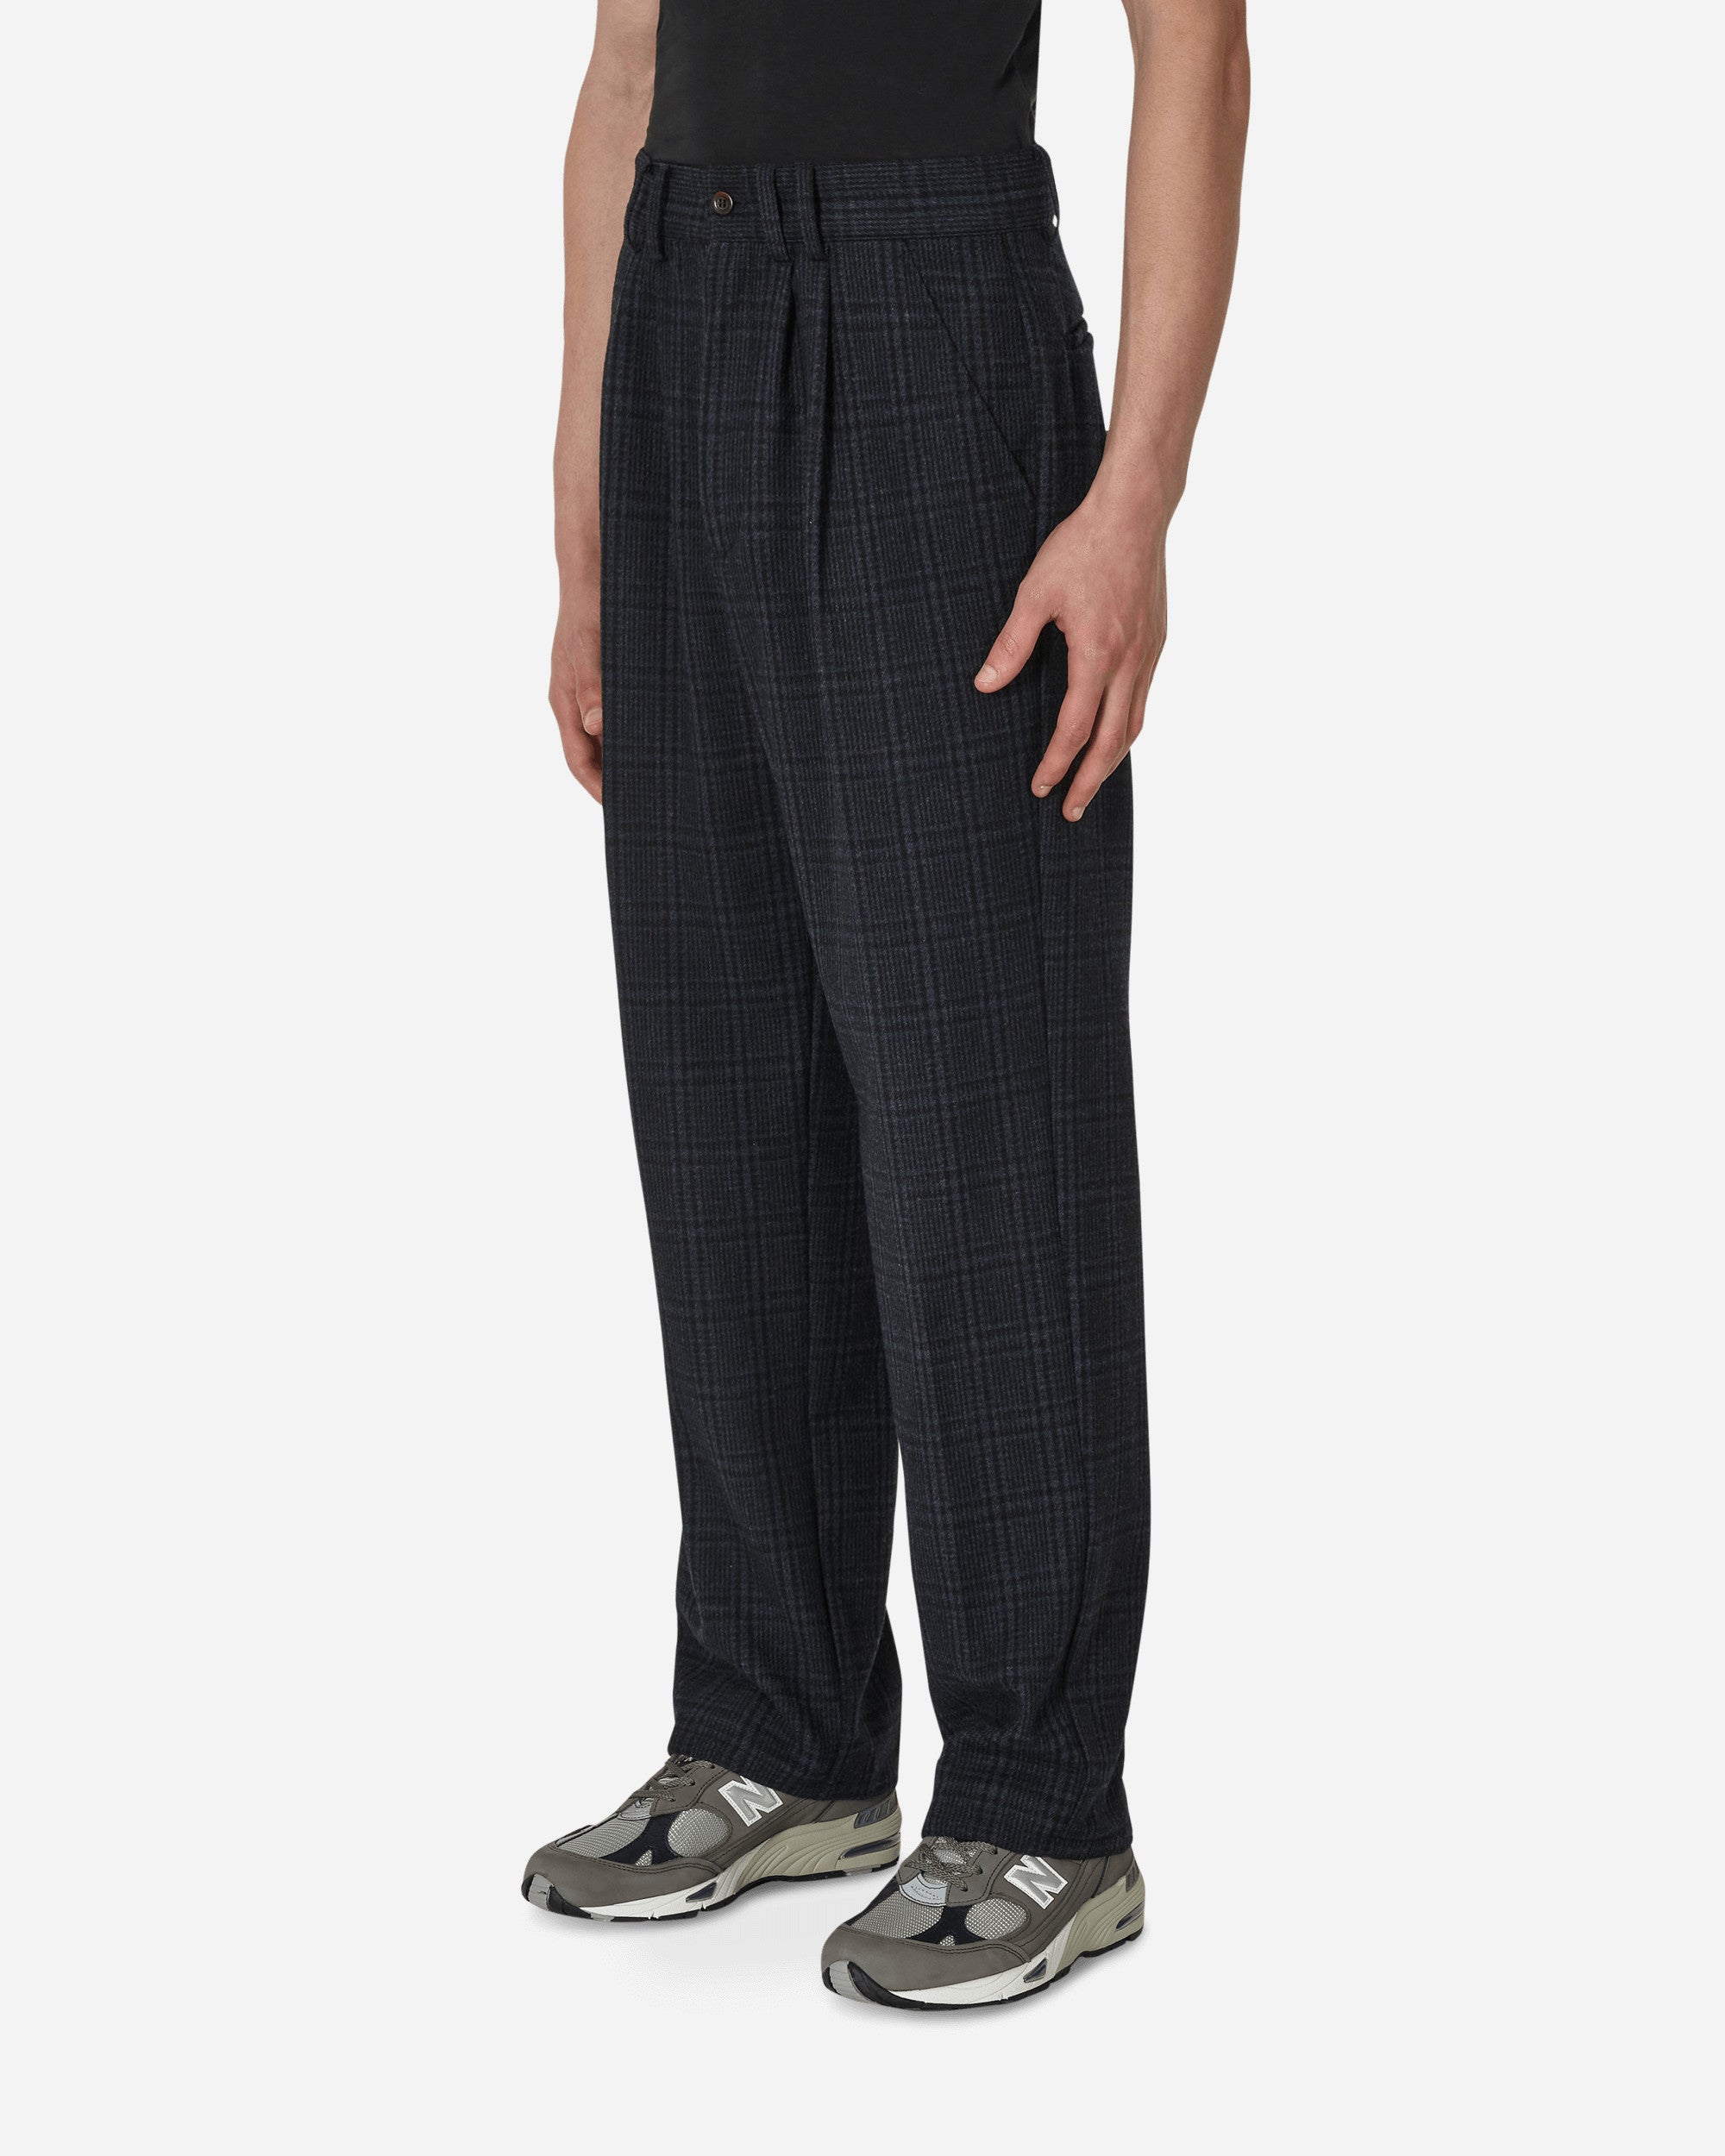 Paccbet Checked Pleated Trousers Woven Navy Pants Trousers PACC11P009 2